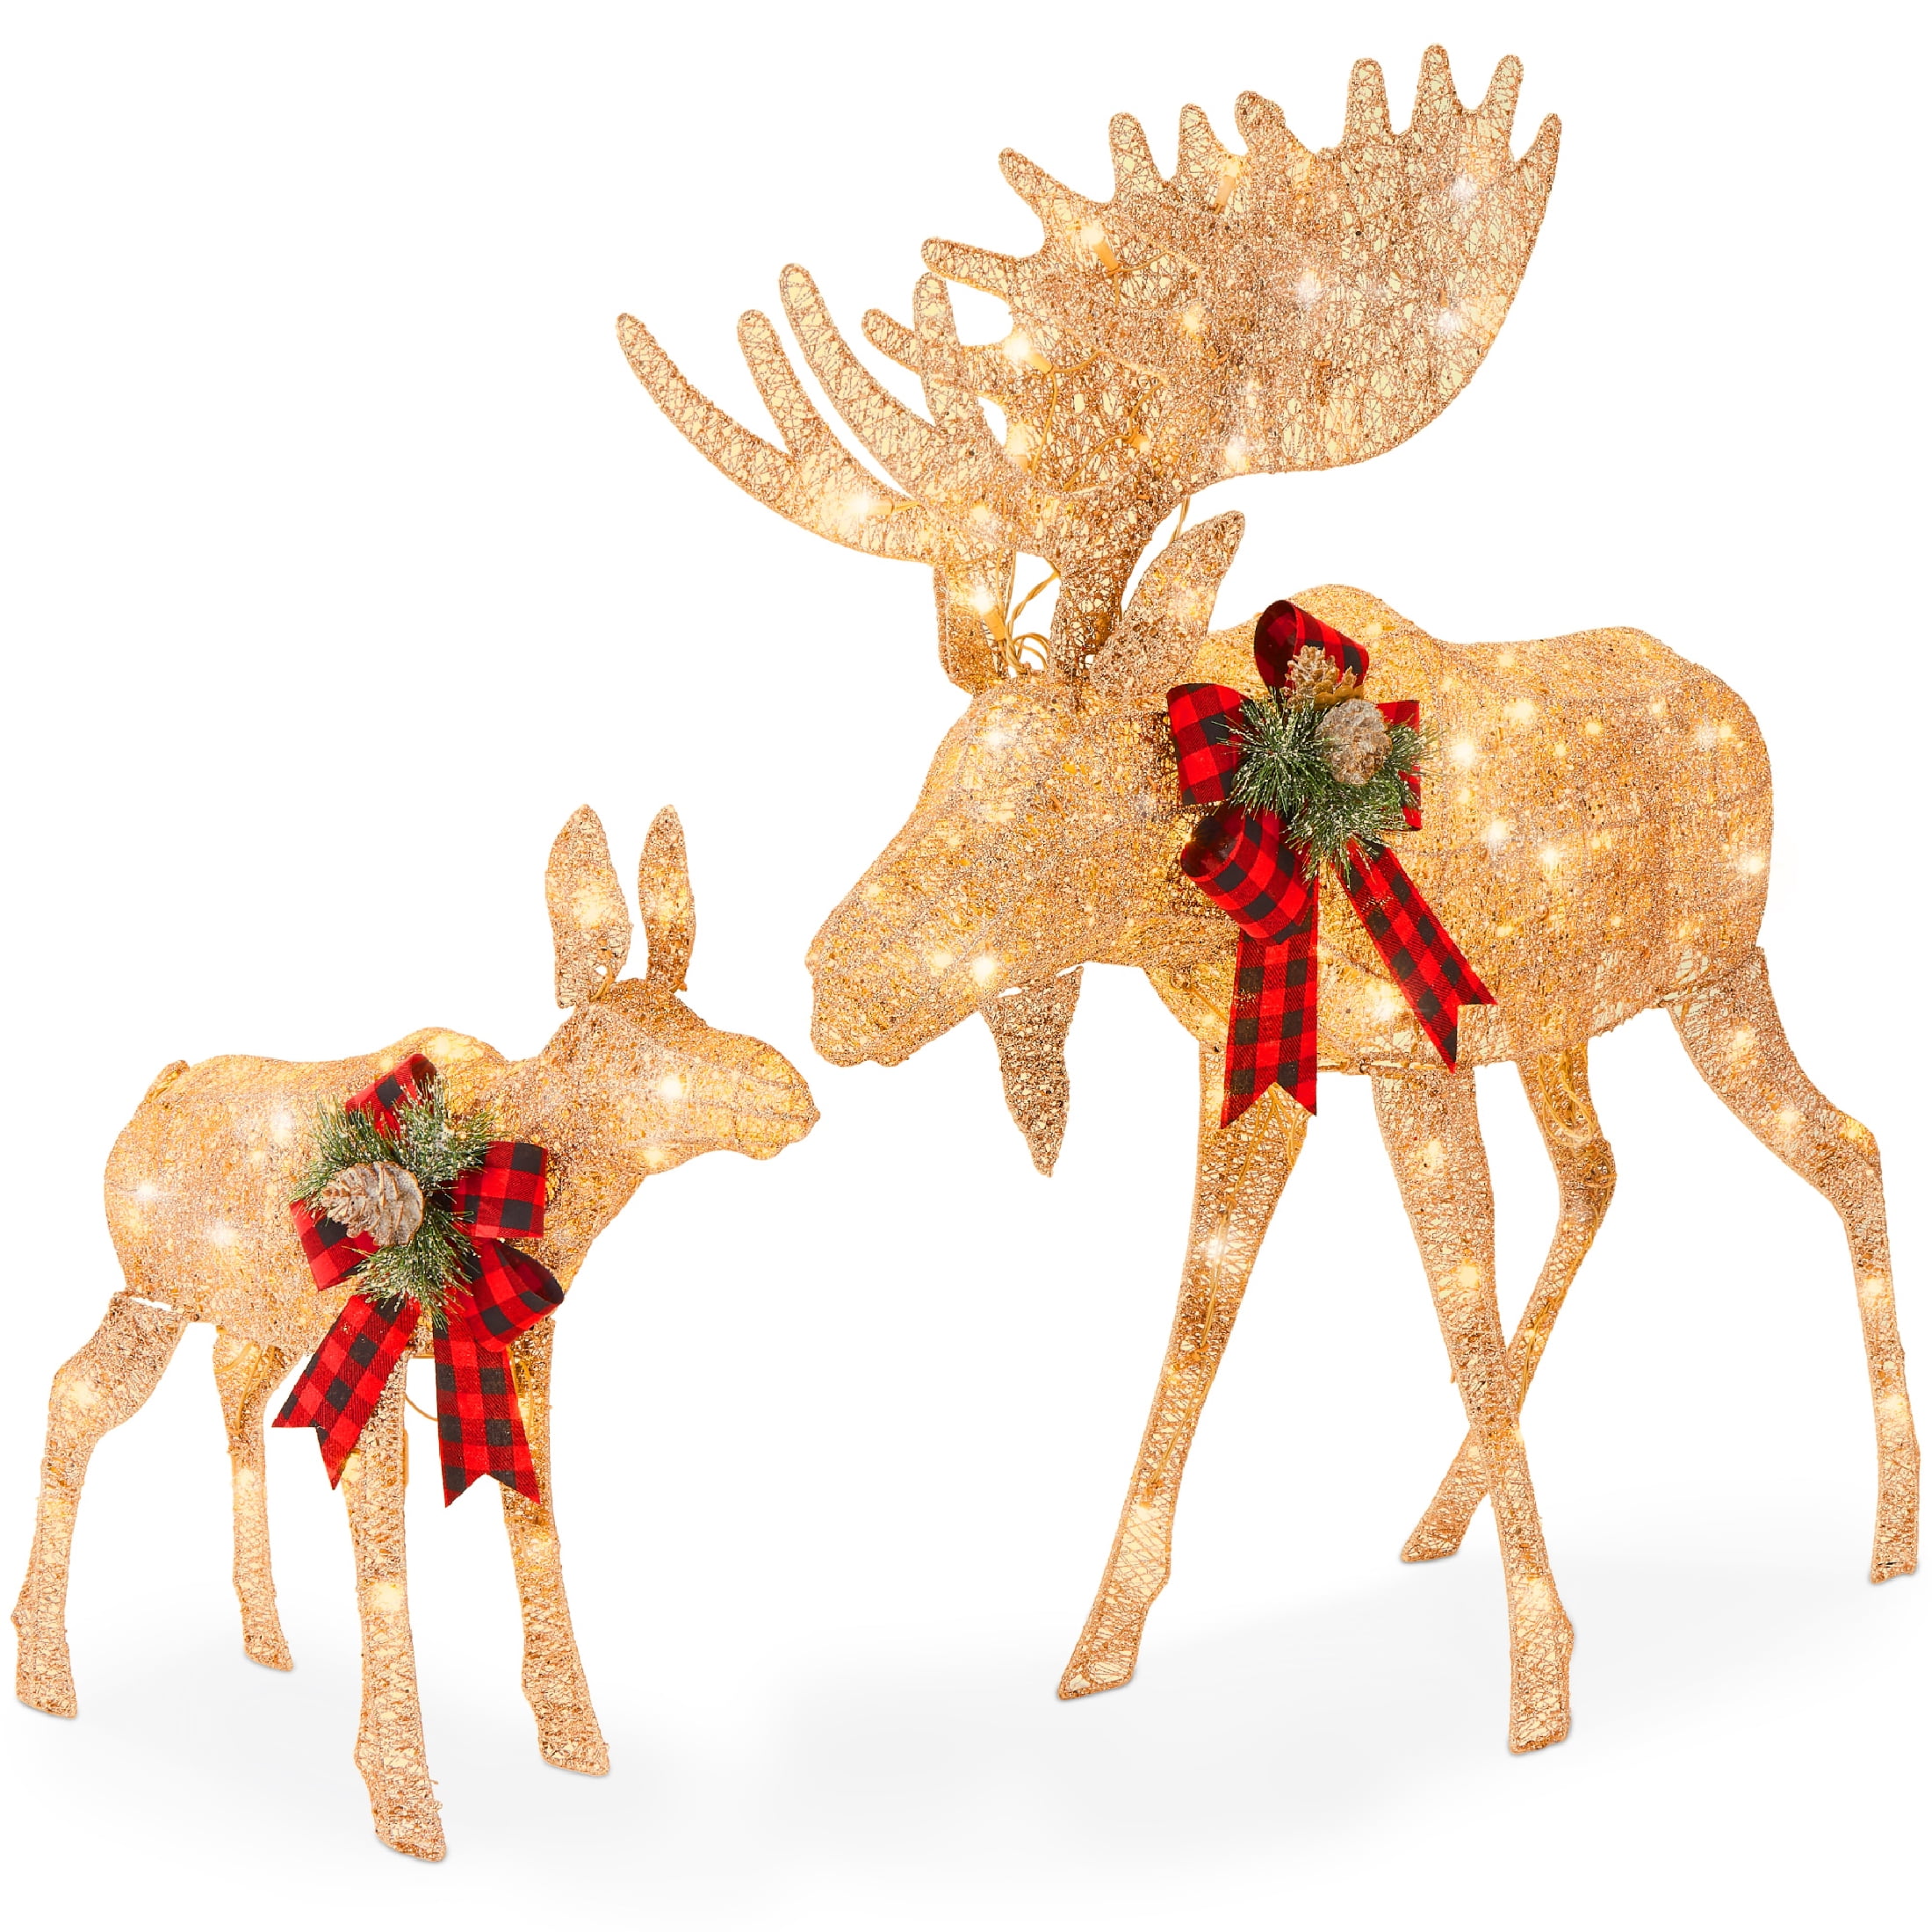 Best Choice Products 2-Piece Moose Family Lighted Christmas Yard Decor Set w/ 170 LED Lights, Stakes, Zip Ties - Gold